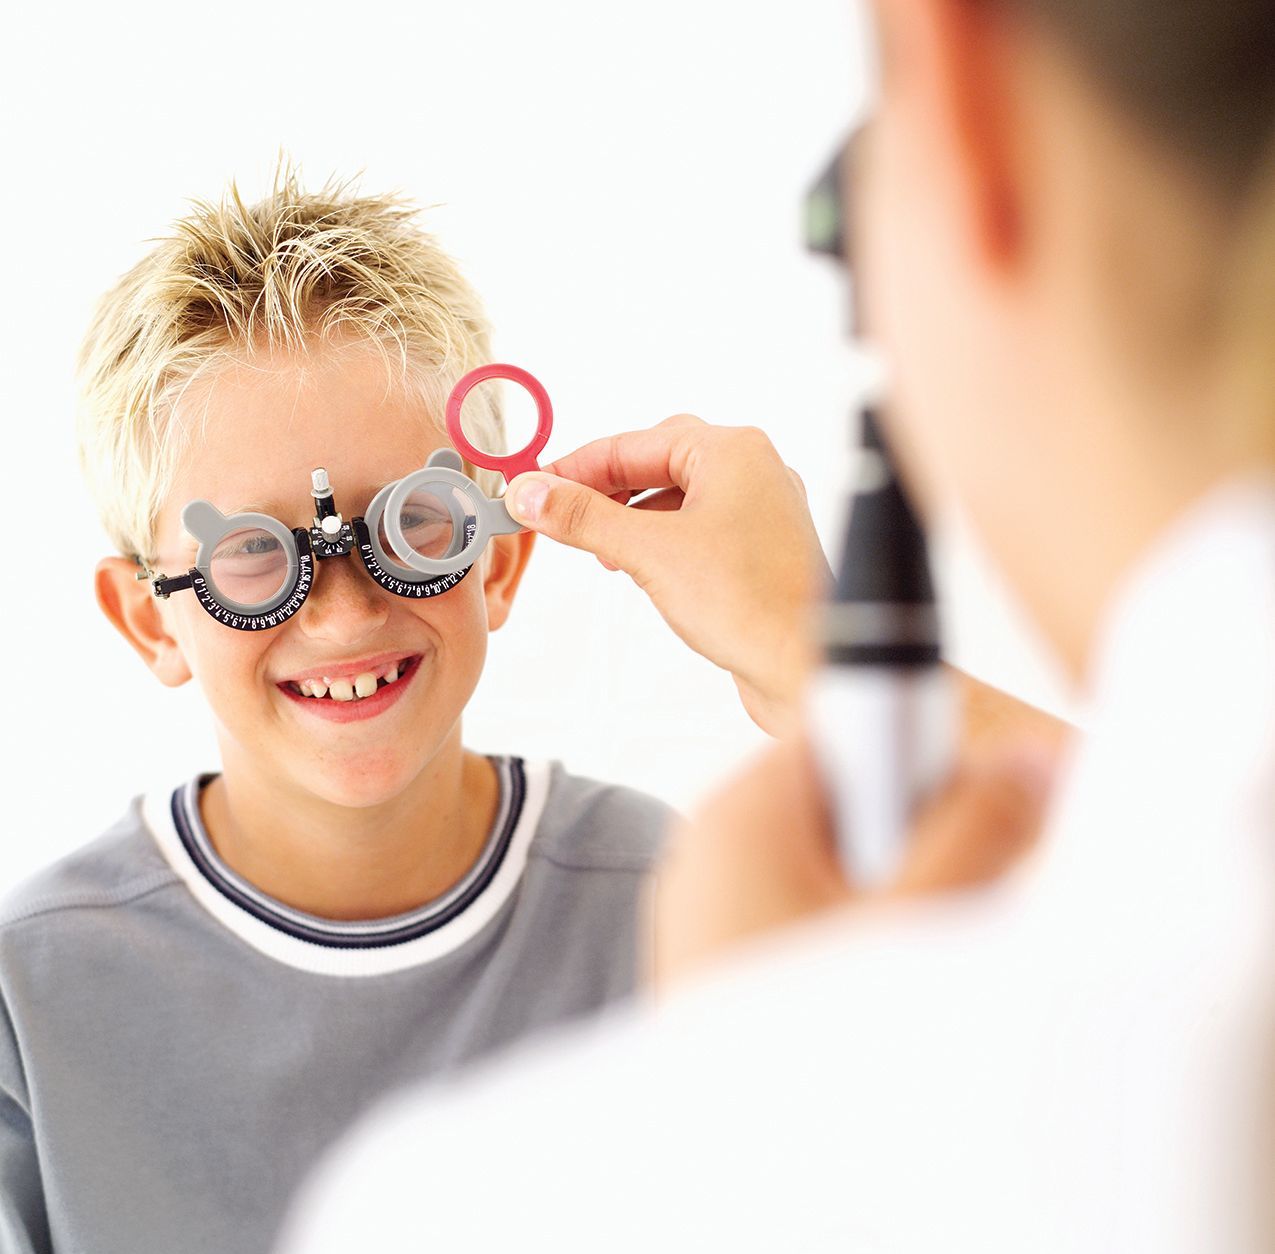 Factors that can Put Kids at Risk of Vision Problems